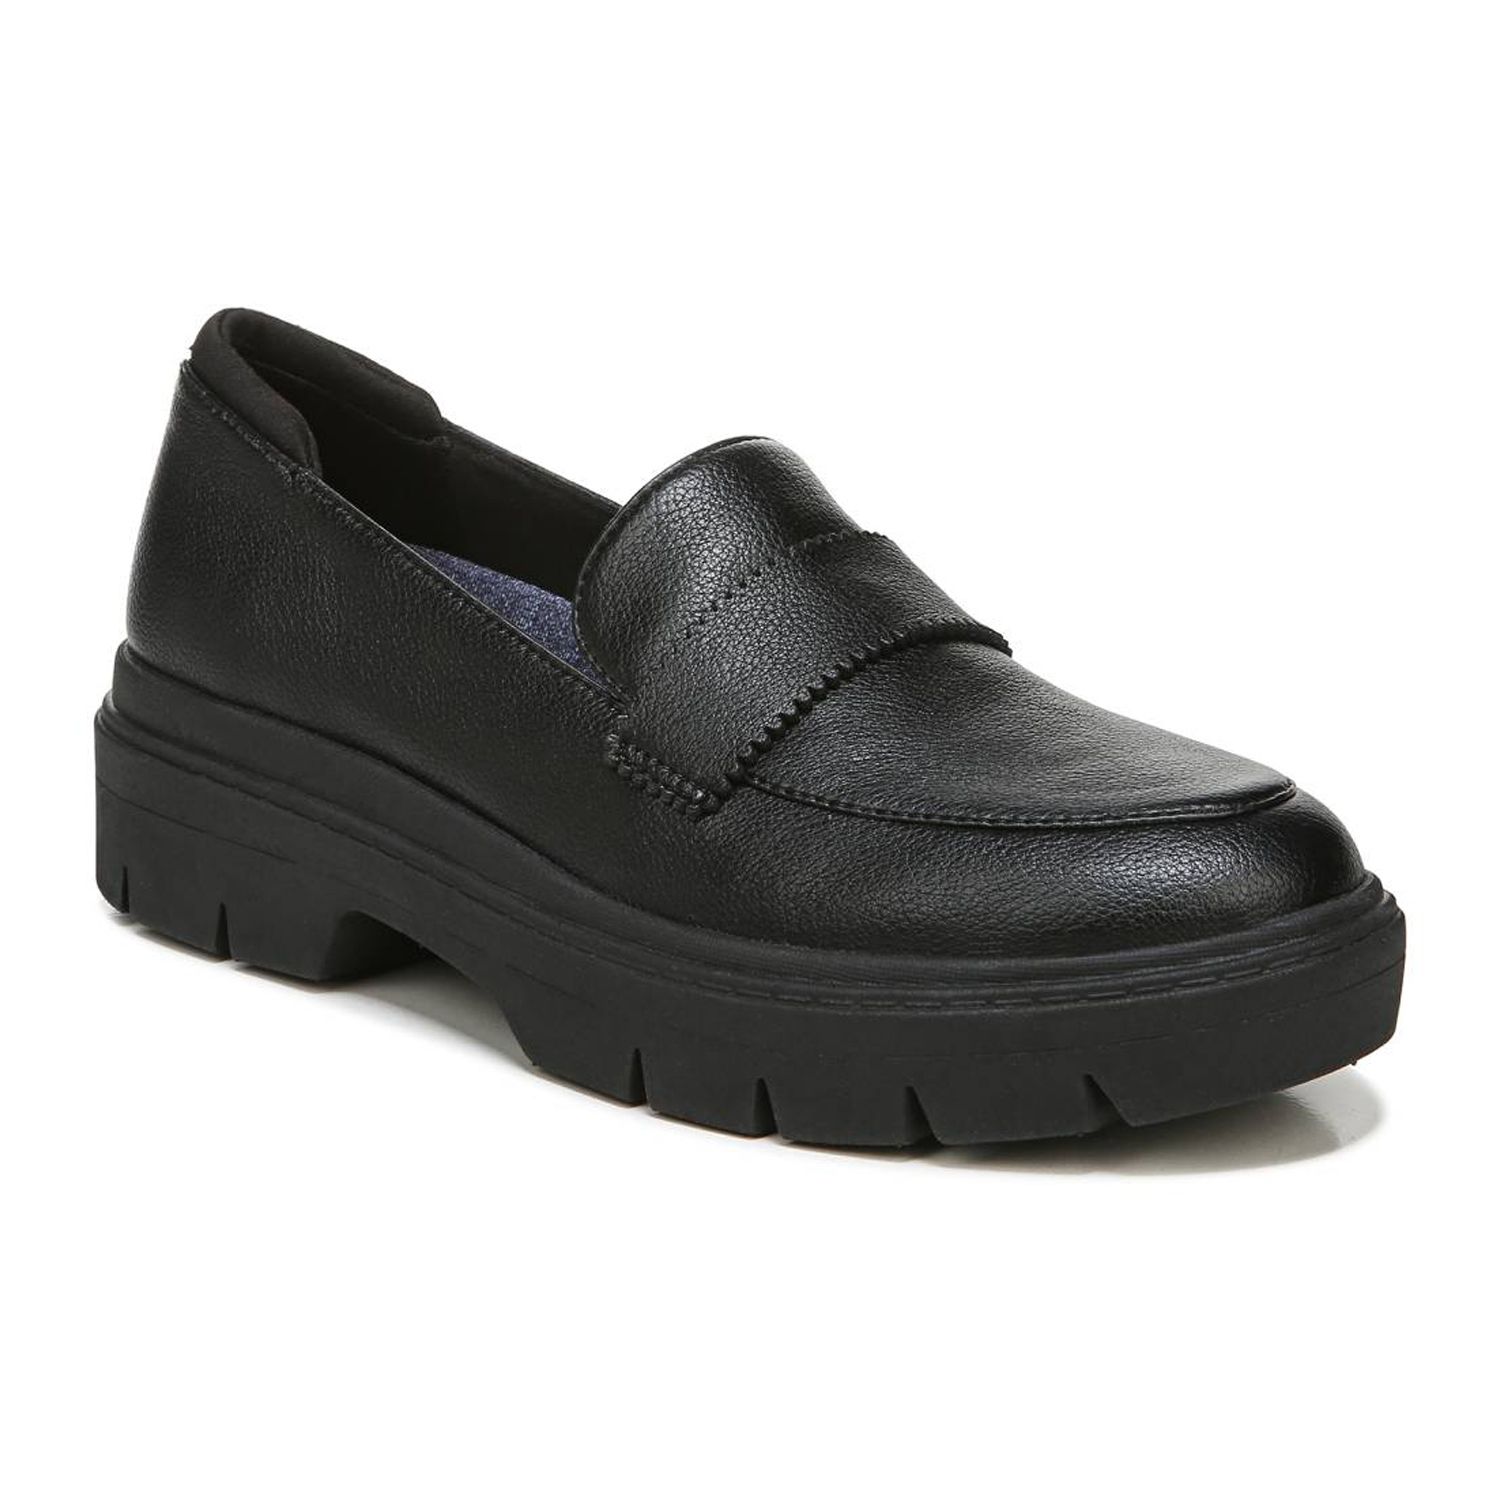 Image for Dr. Scholl's Check In Women's Platform Loafers at Kohl's.